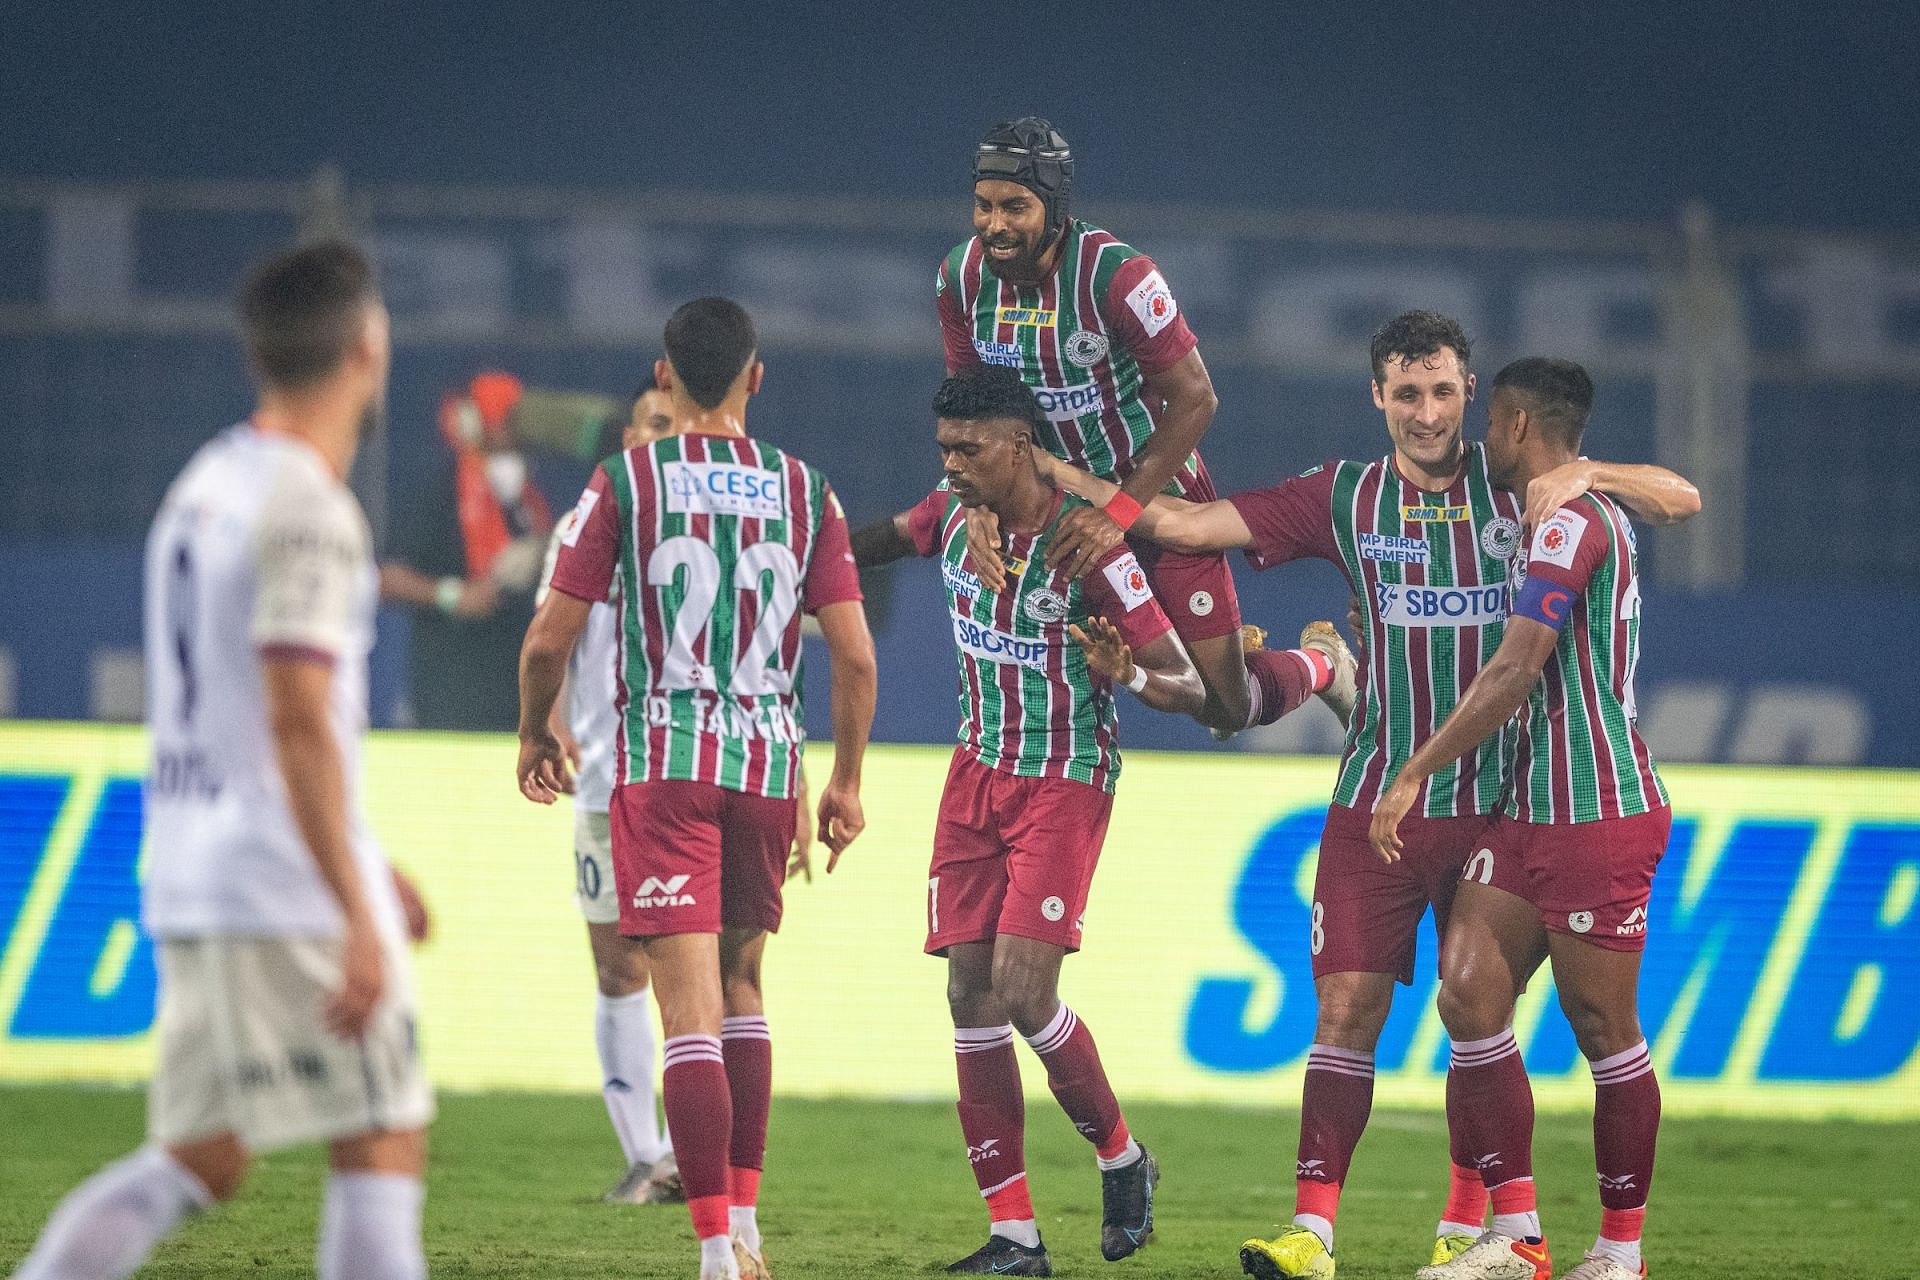 ATK Mohun Bagan&#039;s Liston Colaco scored a stunner to open his side&#039;s account against FC Goa (Image Courtesy: ISL)